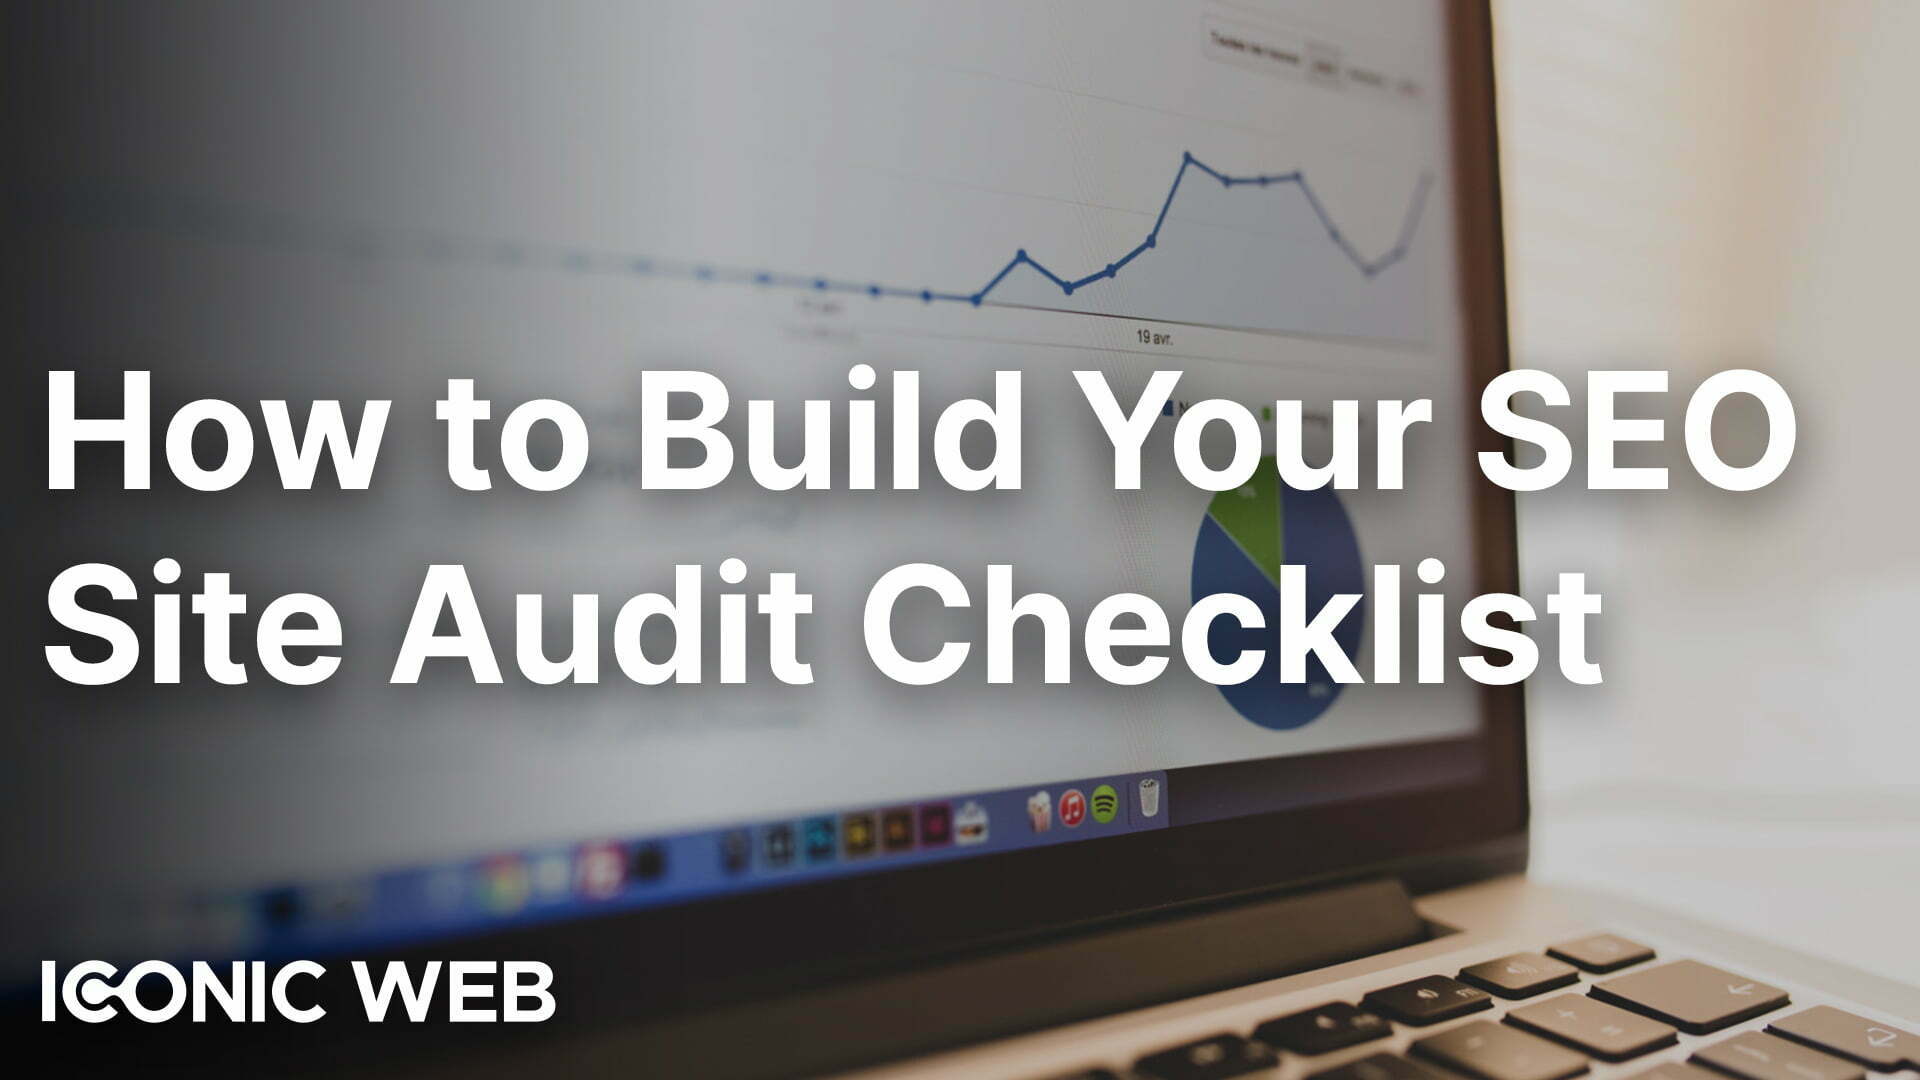 7 Things That Need to Be On Your SEO Site Audit Checklist